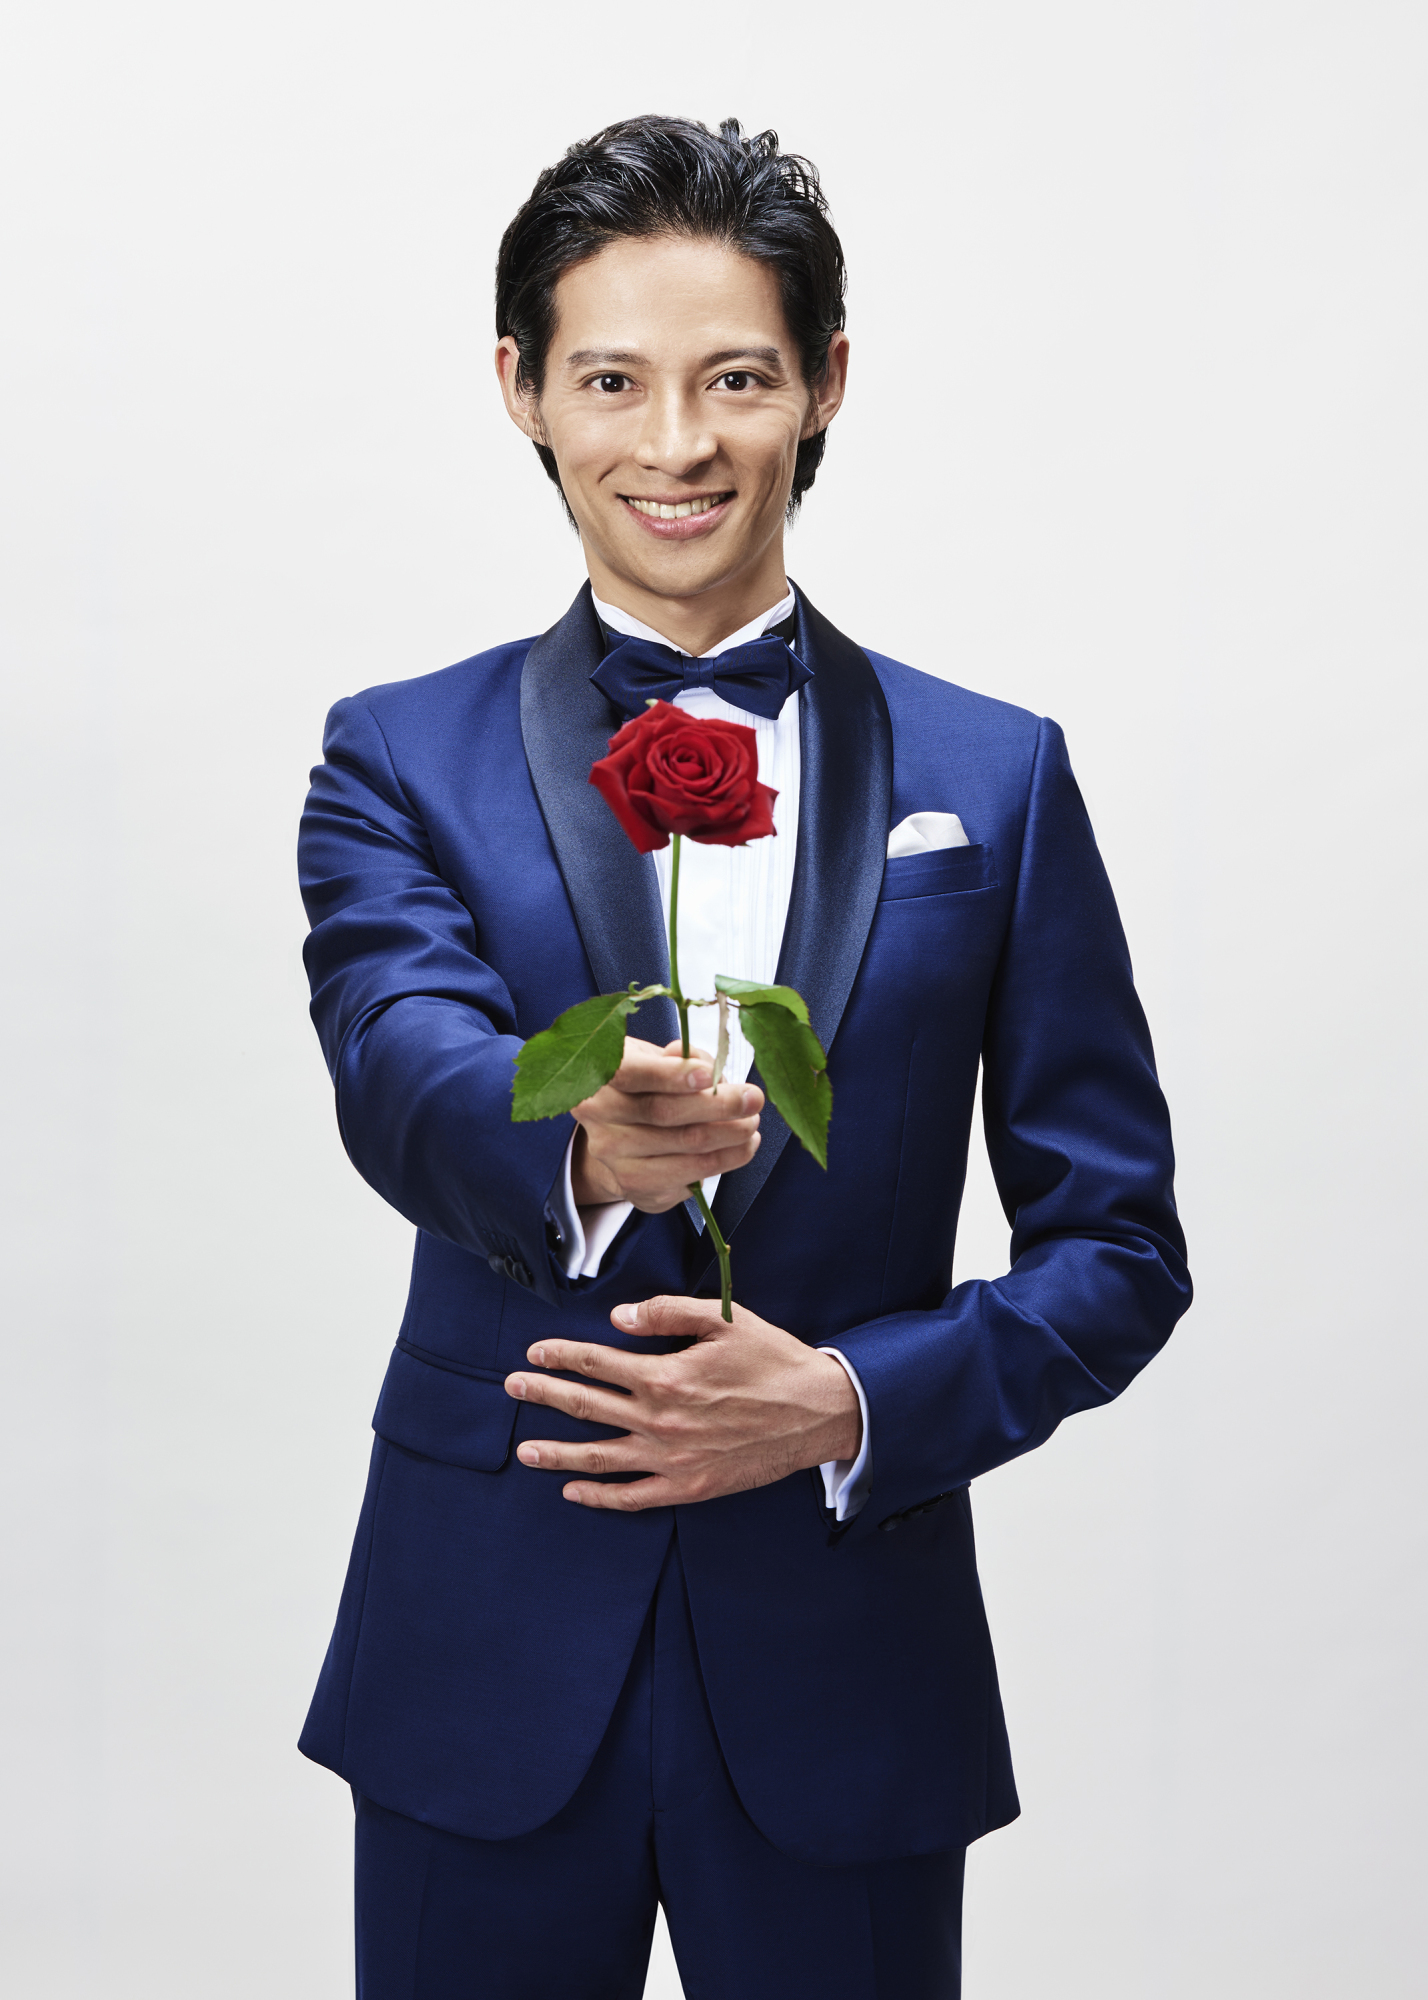 'The Bachelor' is looking for love in Japan | The Japan Times